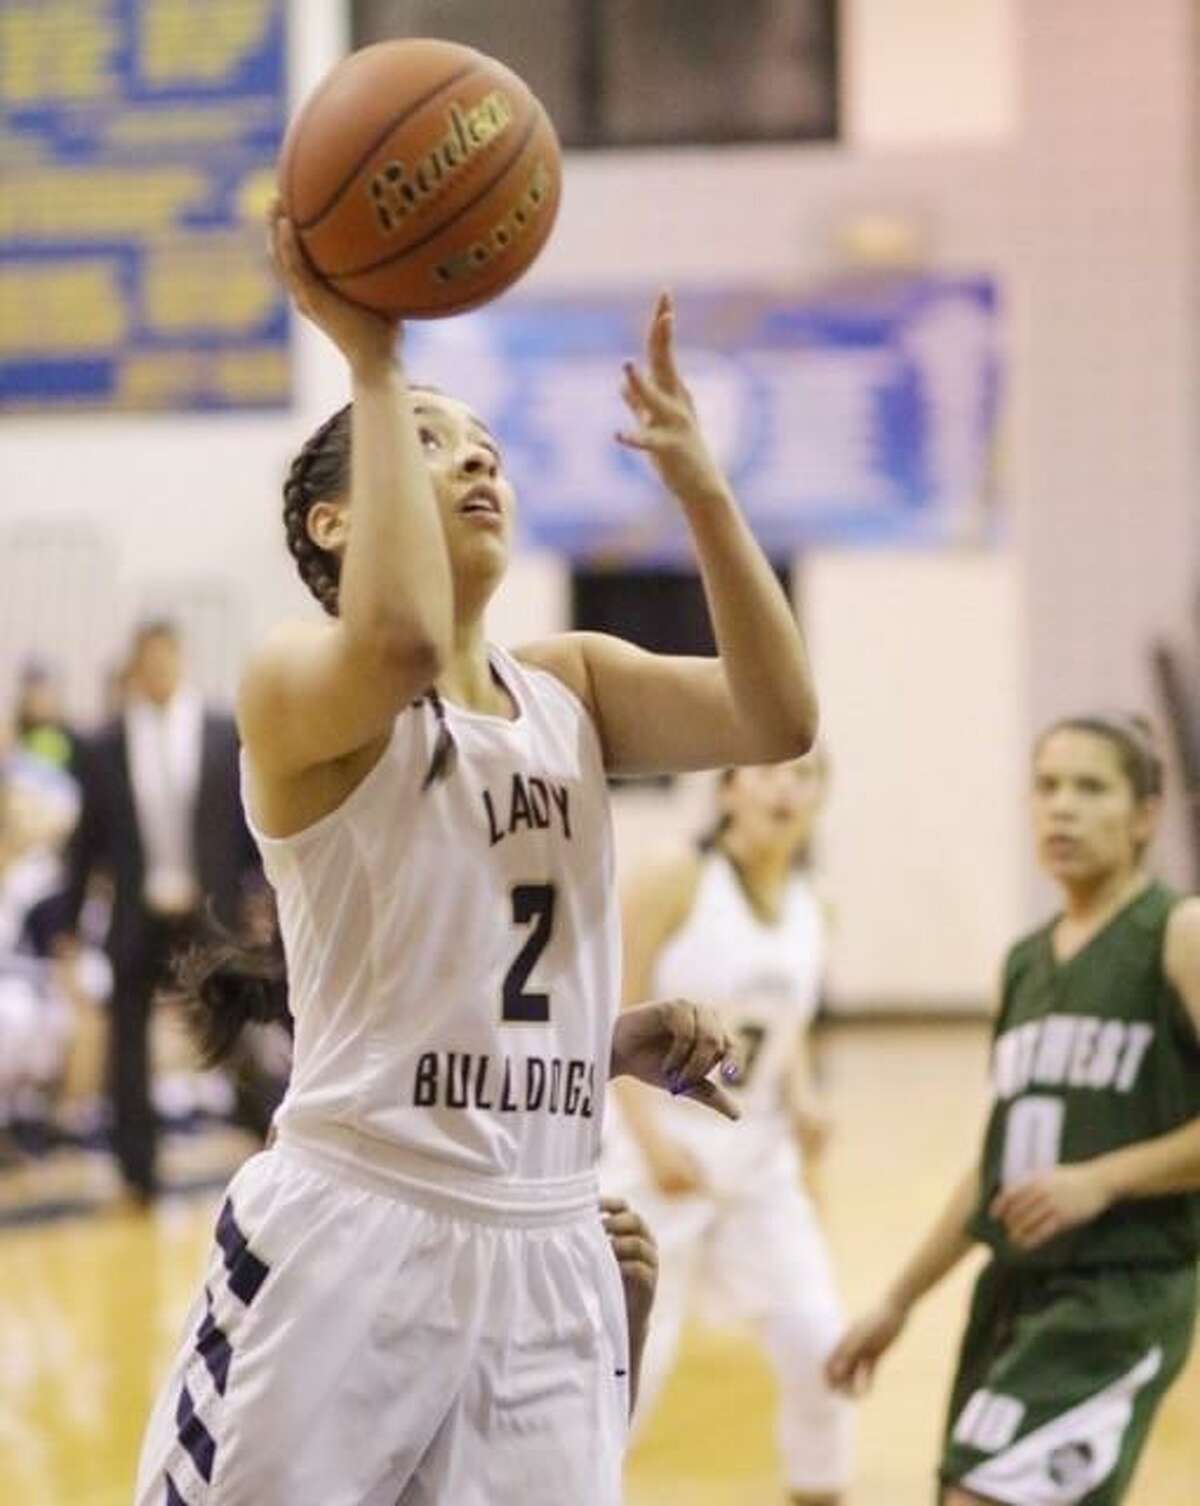 Alexander point guard Dannia González was one of four players who scored in double figures as the Lady Bulldogs won their 17th striaght game beating SA Southwest 79-29 at home on Tuesday. González had 13 points.